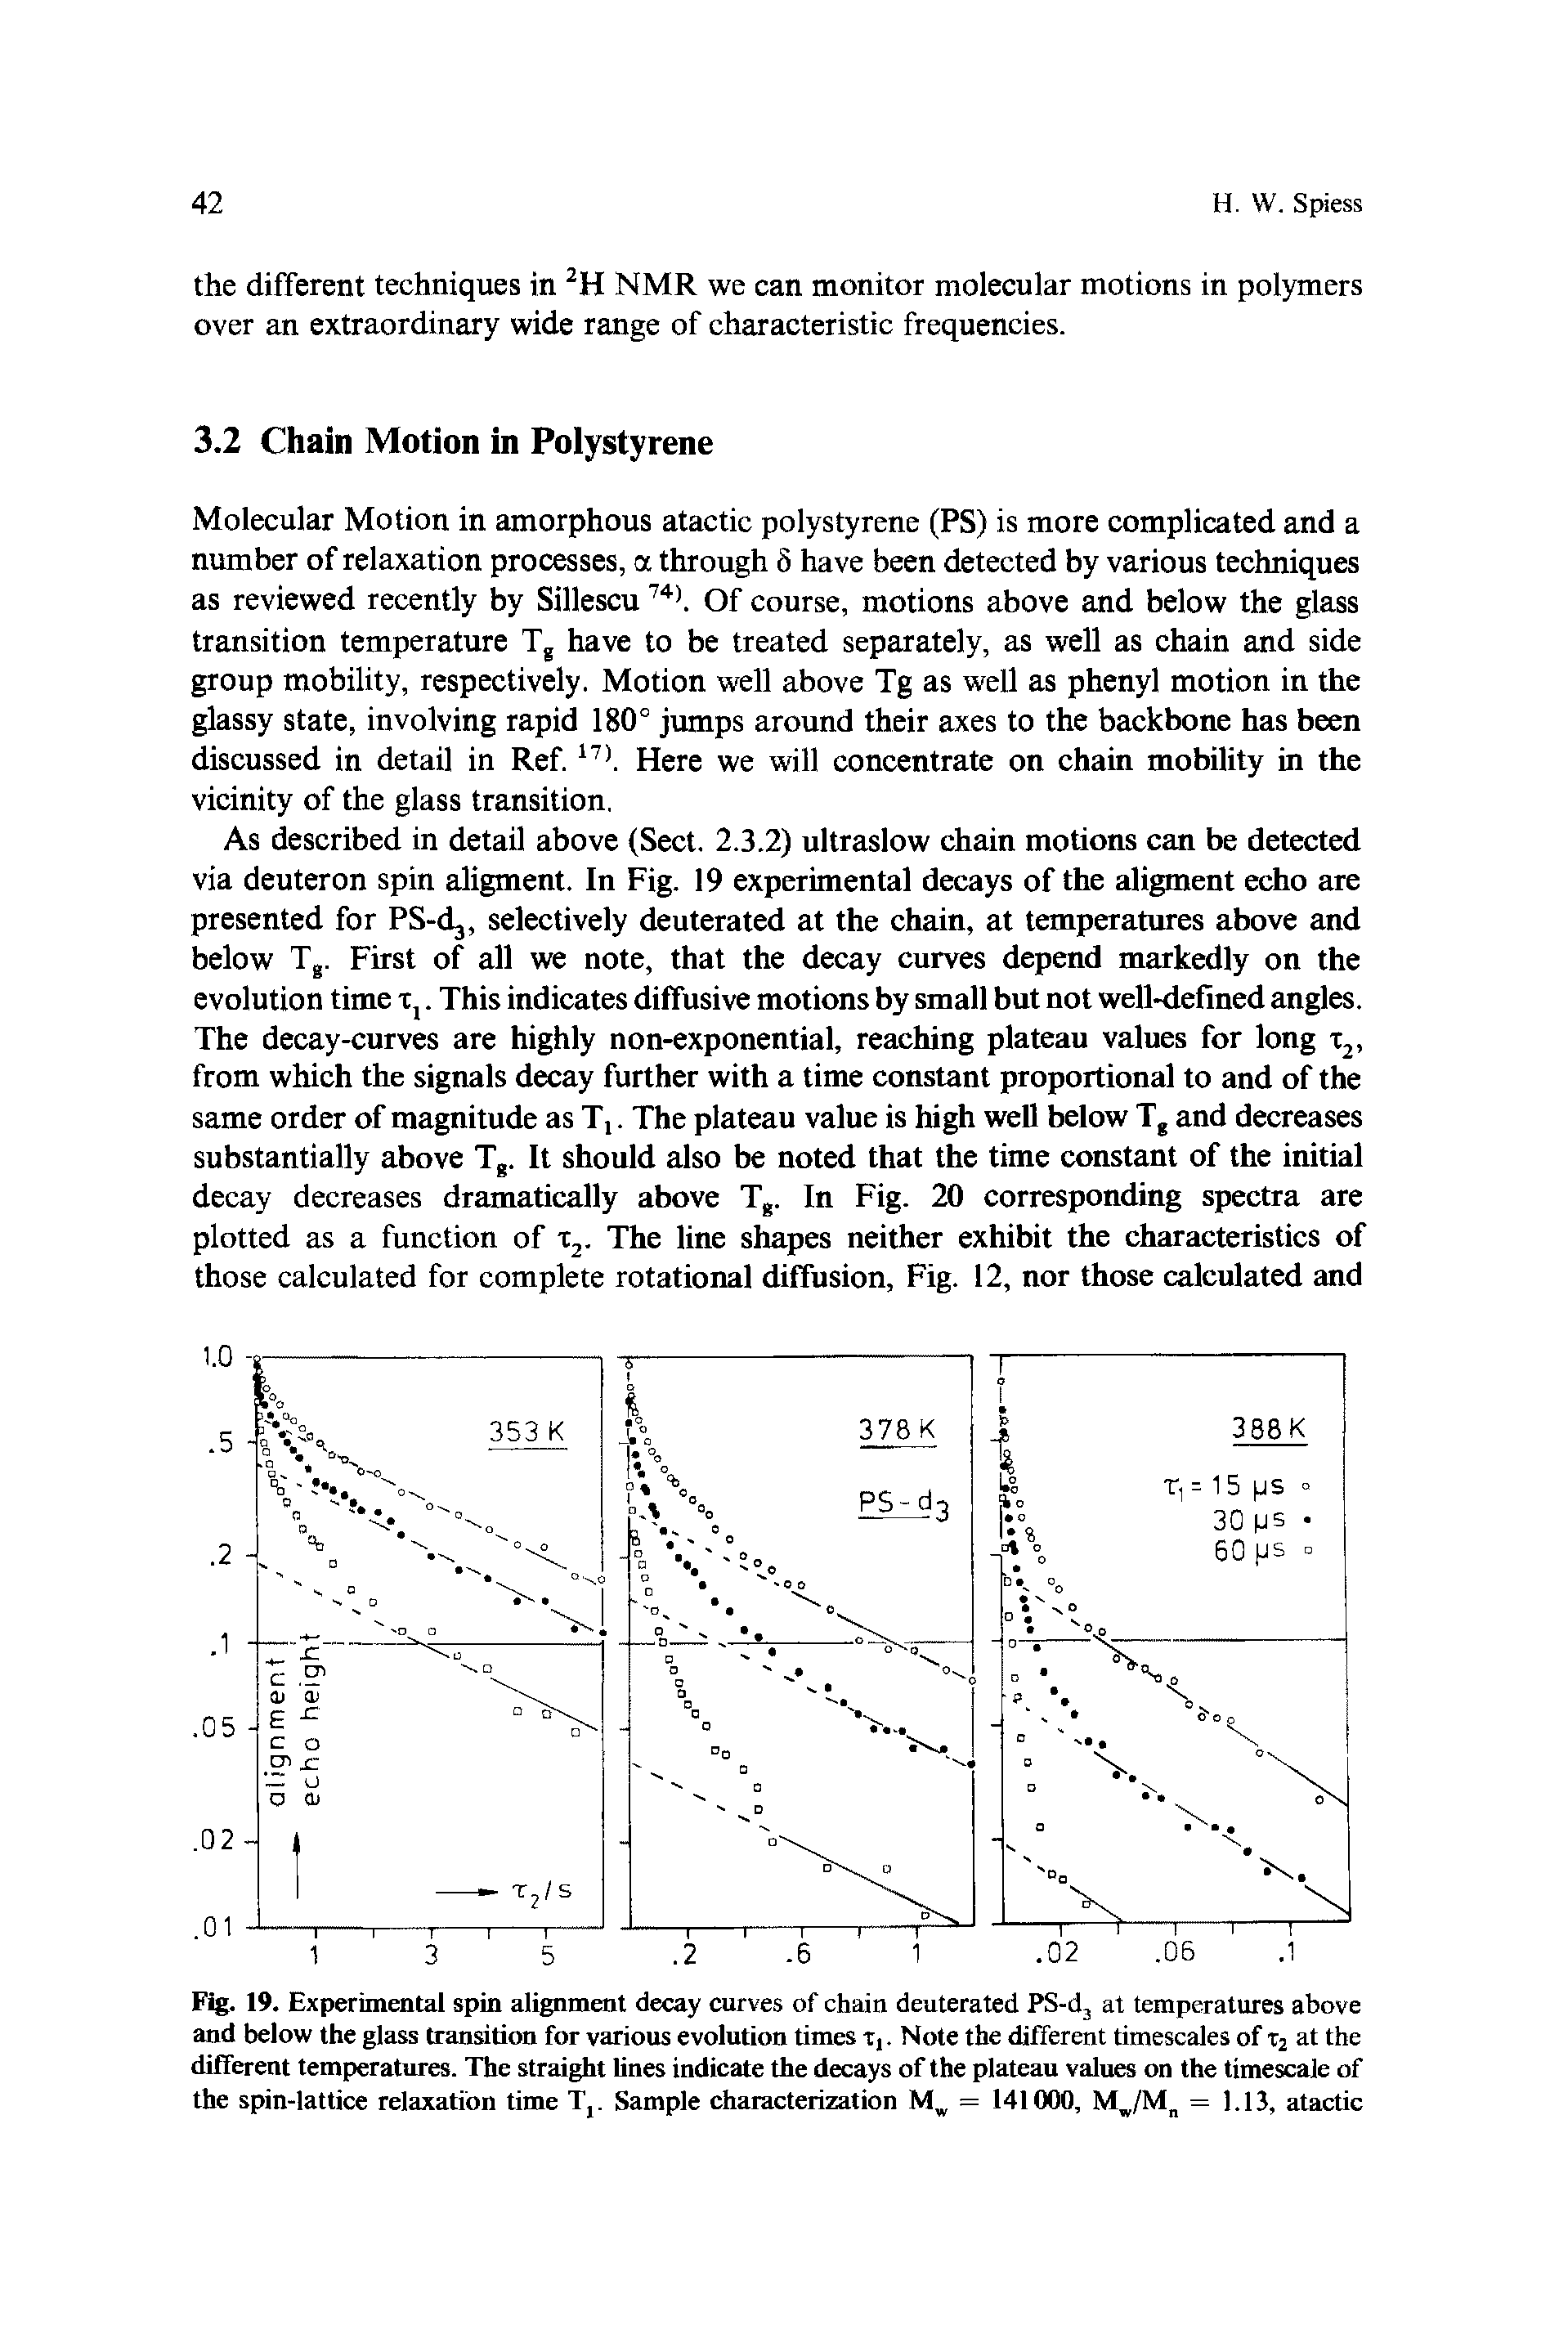 Fig. 19. Experimental spin alignment decay curves of chain deuterated PS-d3 at temperatures above and below the glass transition for various evolution times t,. Note the different timescales of t2 at the different temperatures. The straight lines indicate the decays of the plateau values on the timescale of the spin-lattice relaxation time T,. Sample characterization Mw = 141000, Mw/Mn = 1.13, atactic...